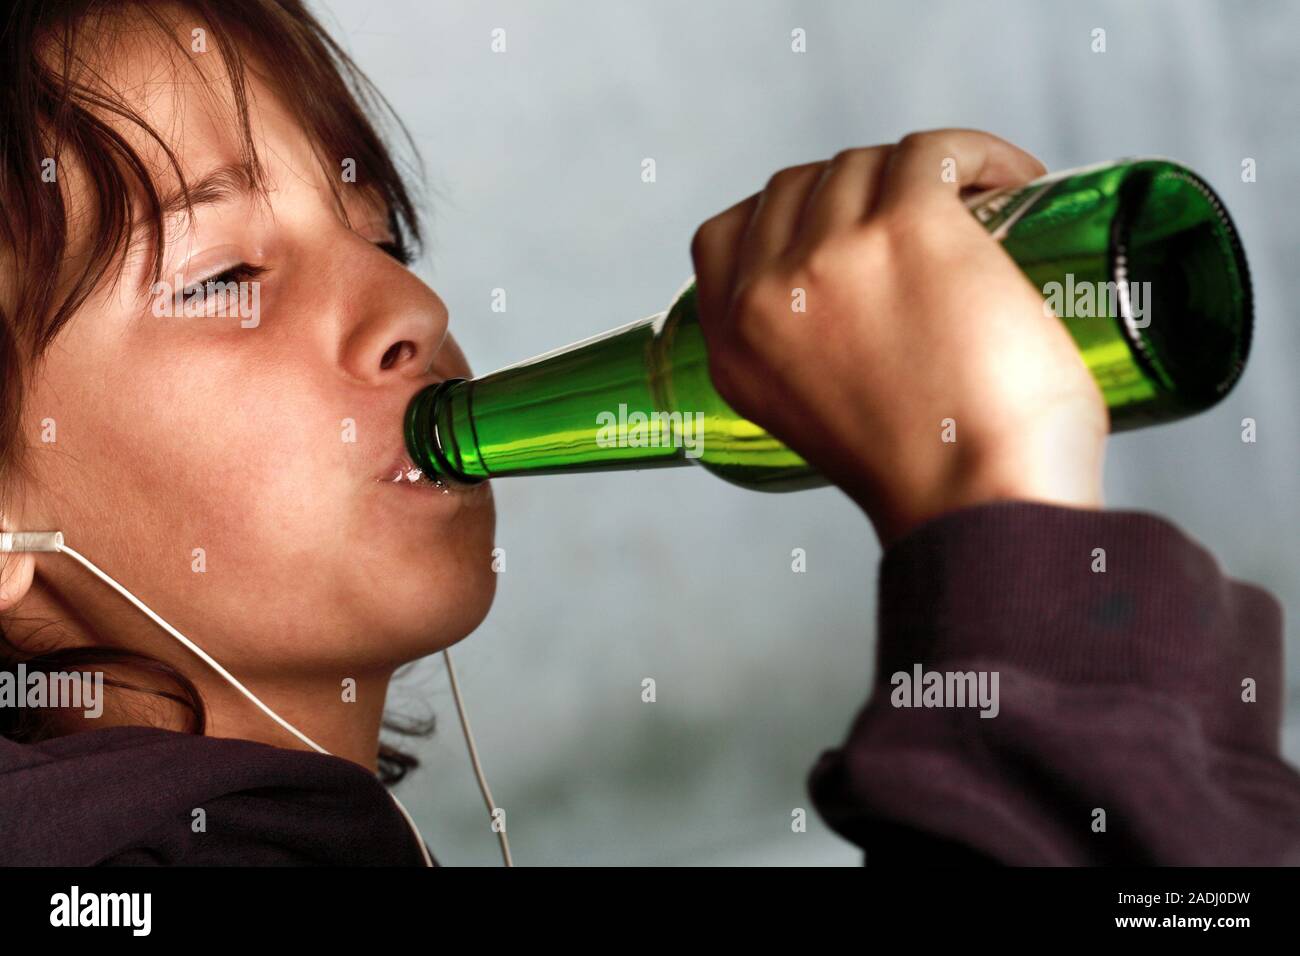 MODEL RELEASED. Underage drinking. Nine year old boy wearing headphones and drinking a bottle of beer. Stock Photo